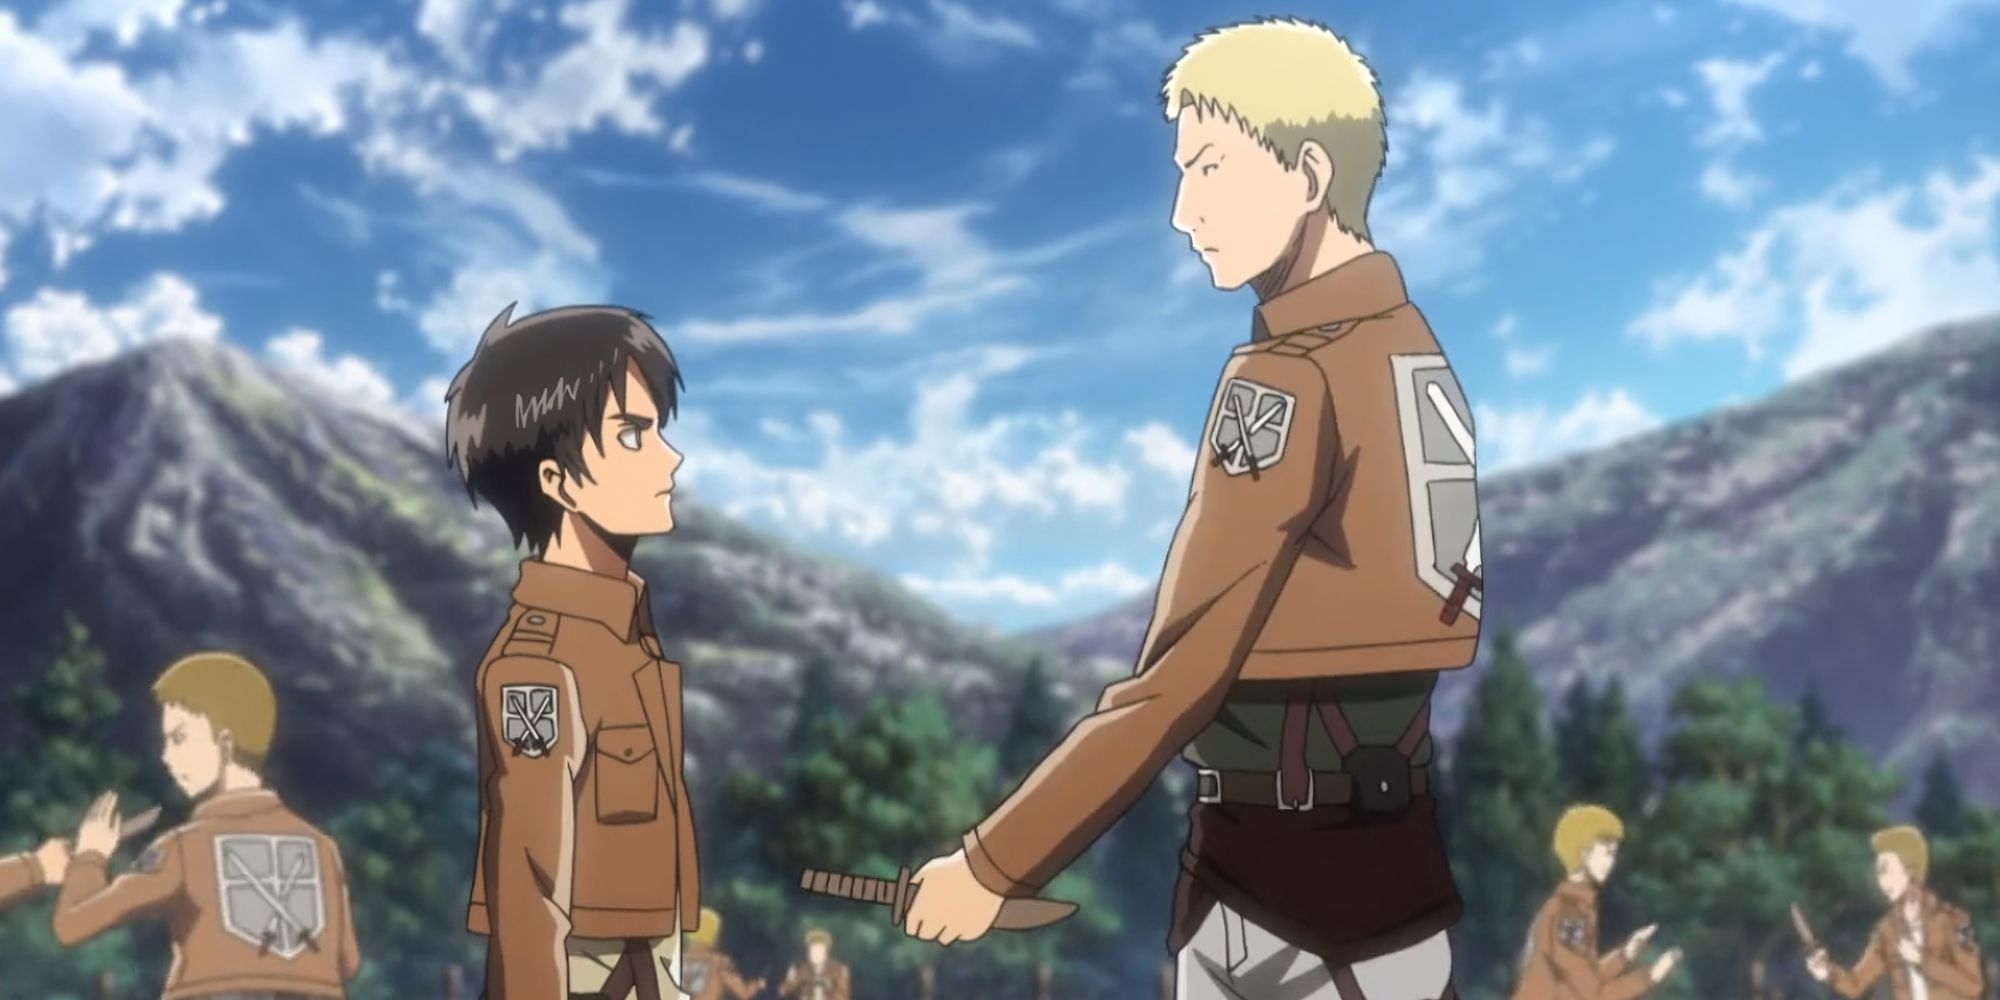 Reiner hands over a knife to Eren during training corps season 1